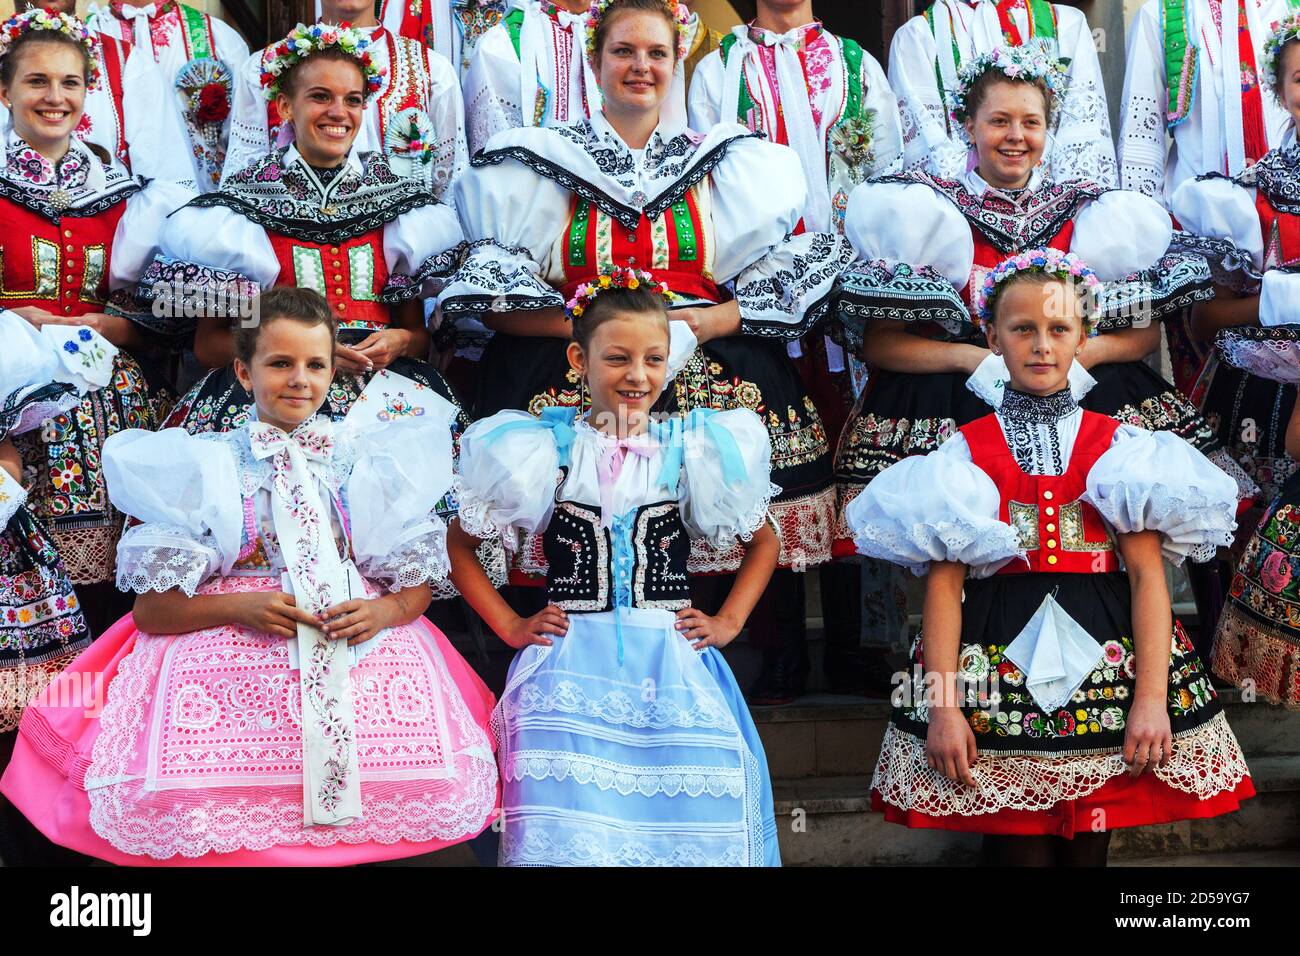 Children and young women in traditional costumes Europe South Moravia Czech Republic Stock Photo